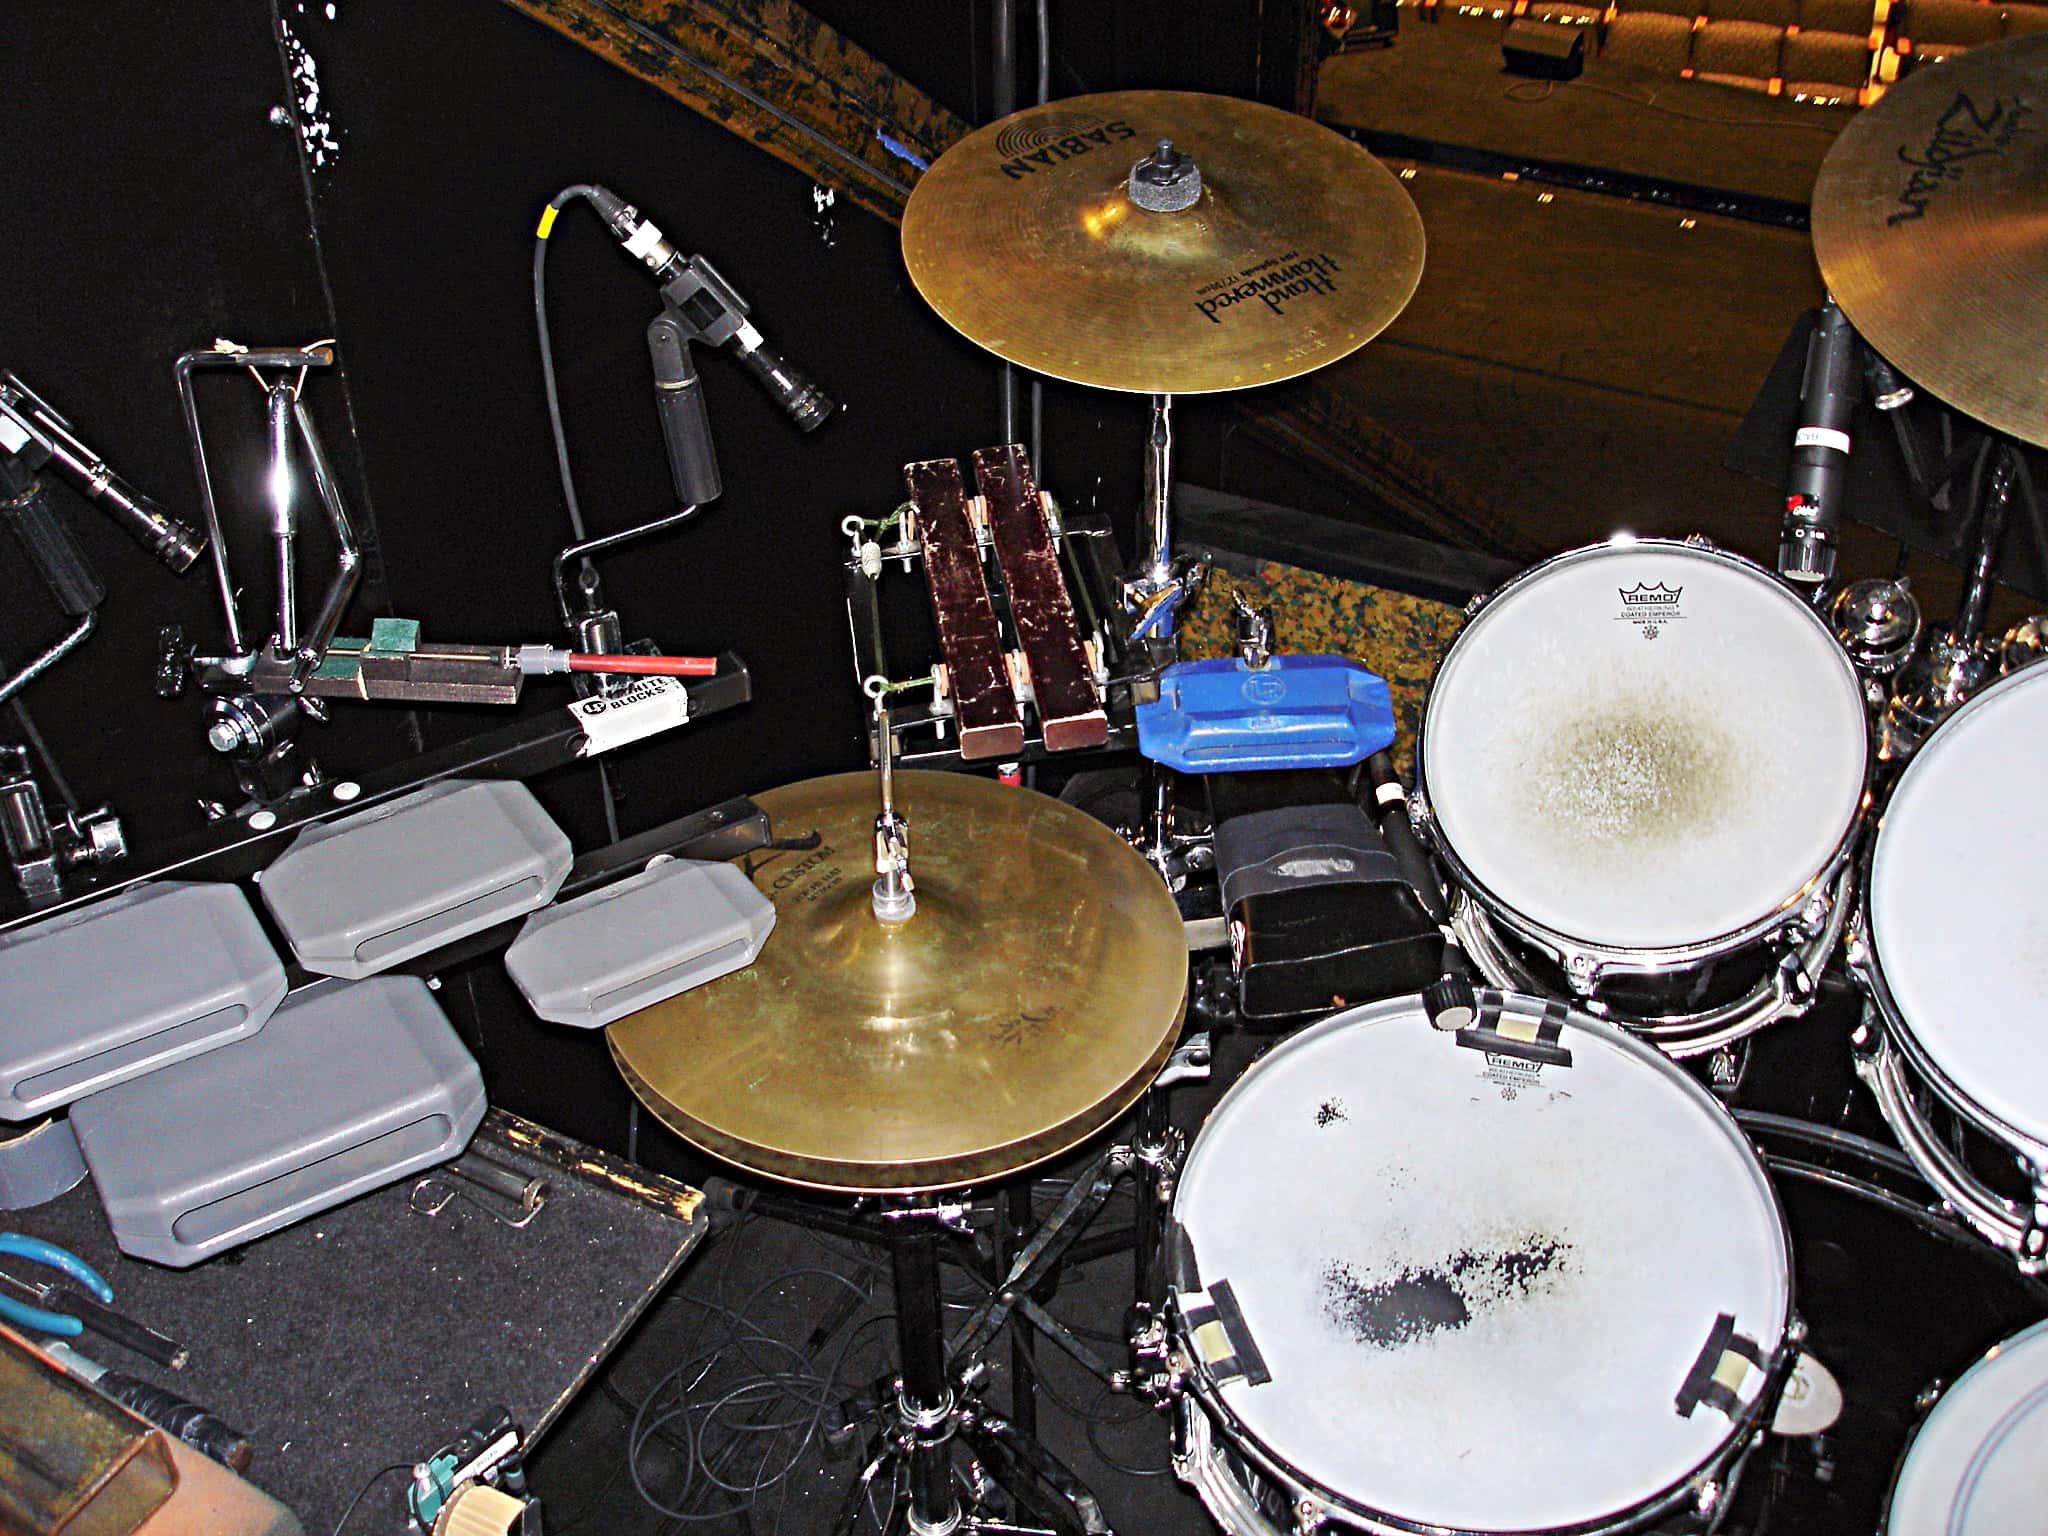 Cubby O'Briens setup for the National Tour of Chicago at the Majestic Theatre in San Antonio, Texas.